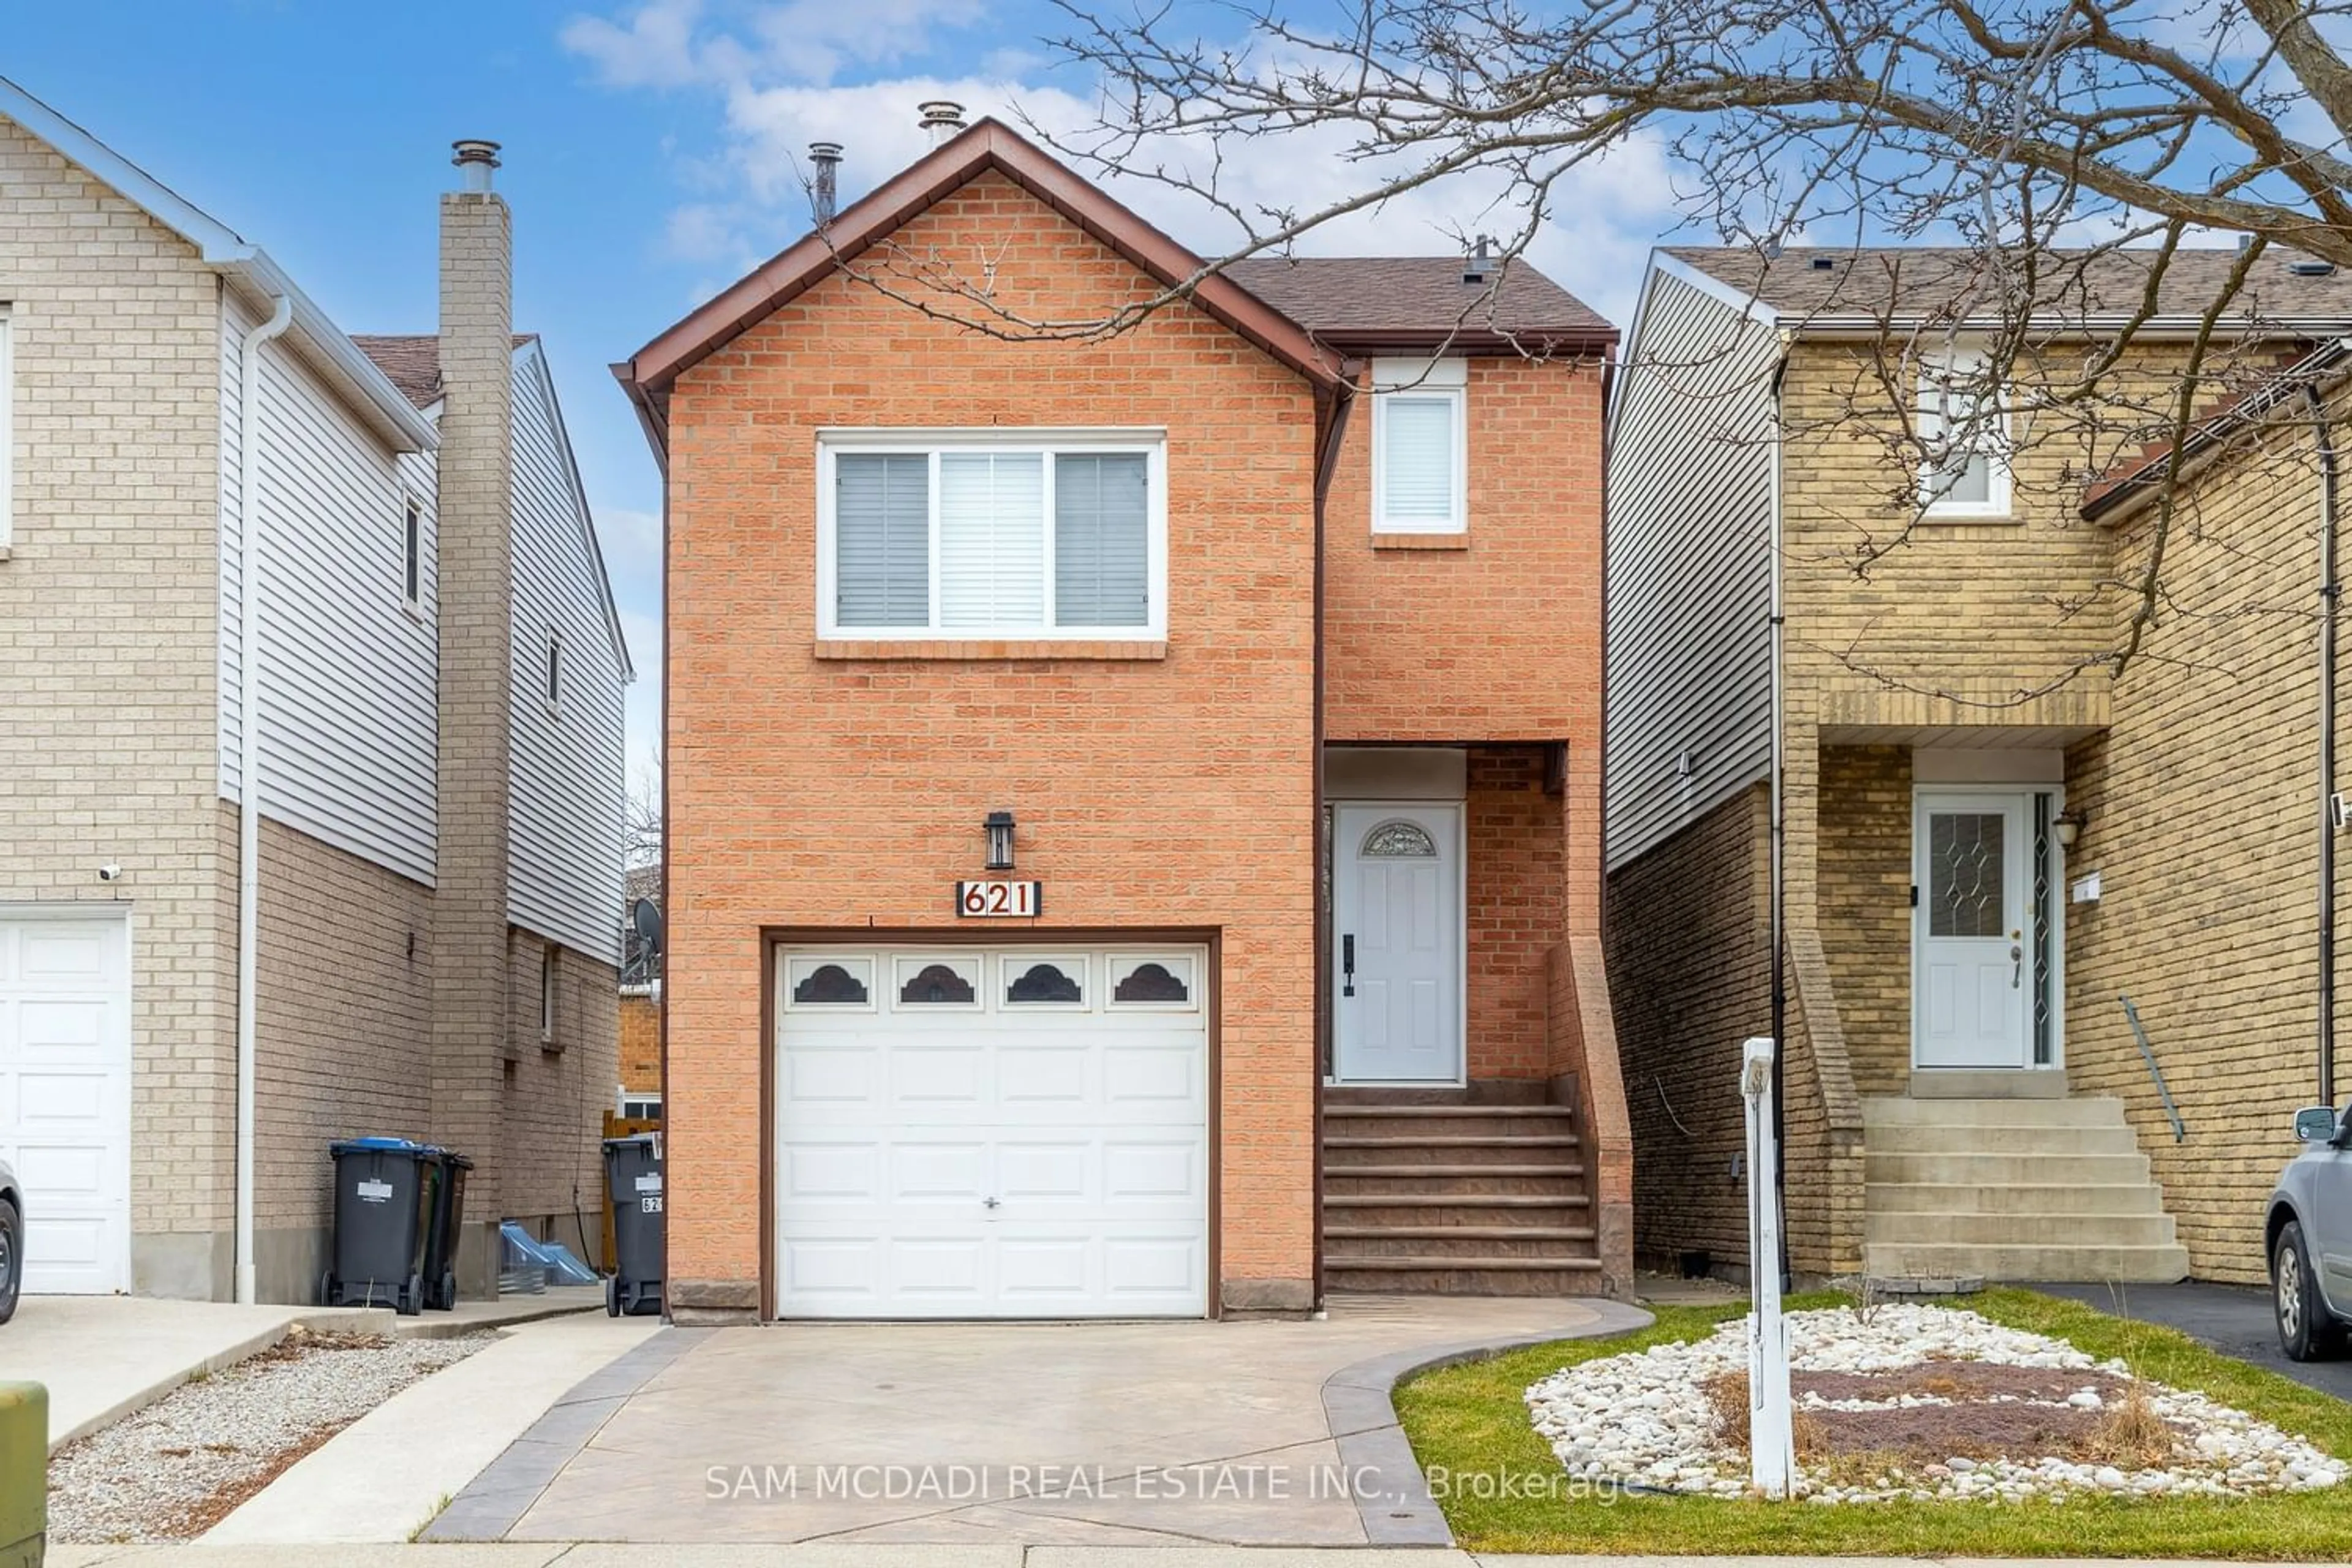 Home with brick exterior material for 621 Galloway Cres, Mississauga Ontario L5C 3R7